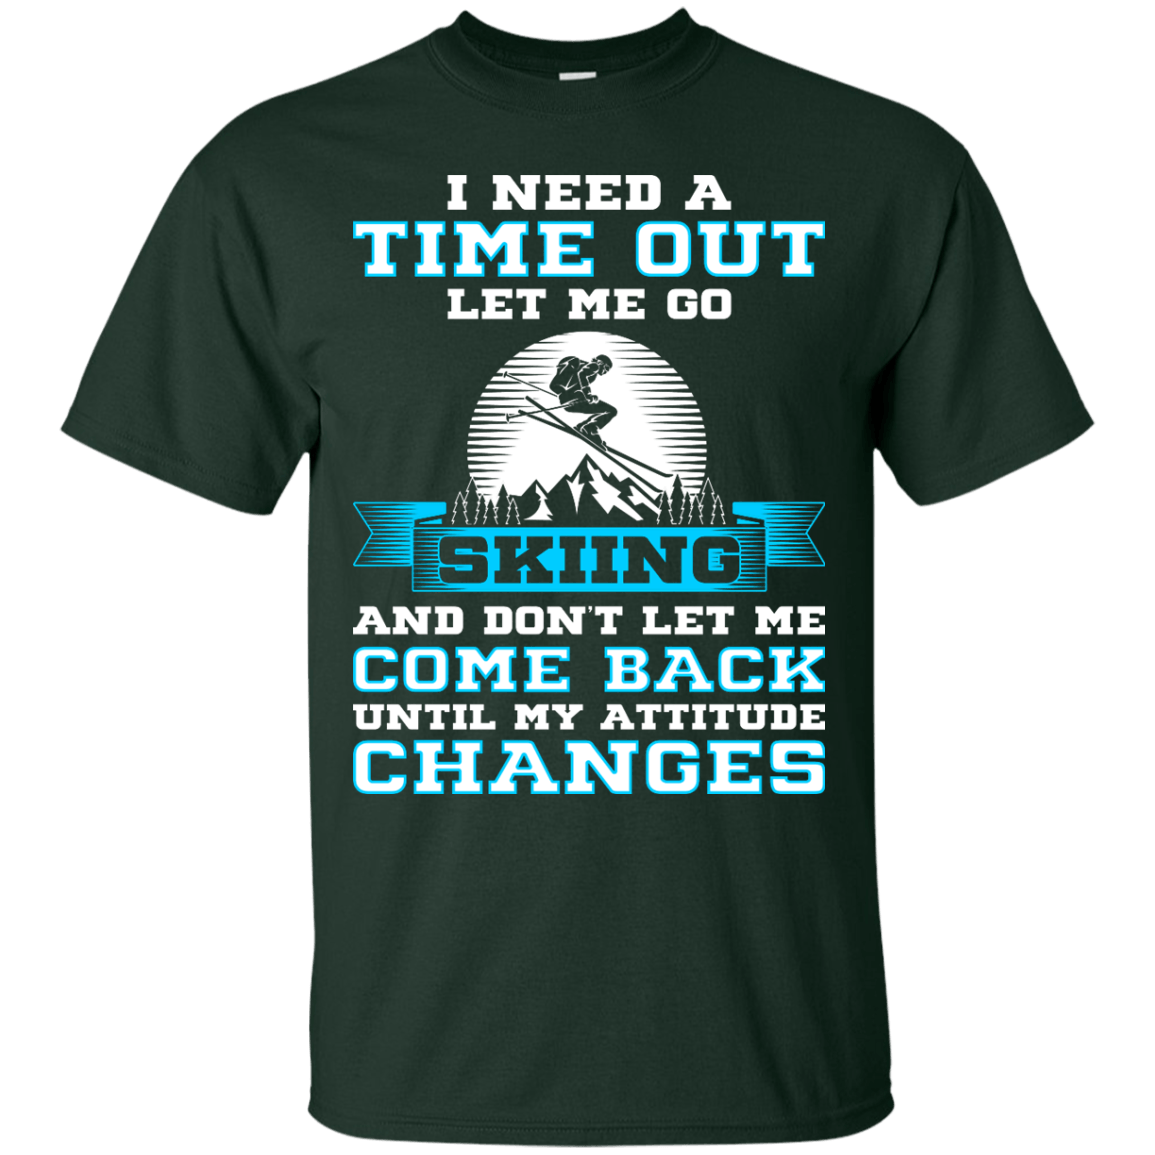 I Need A Time Out Let Me Go Skiing And Don't Let Me Come Back Until My Attitude Changes Tees - Powderaddicts